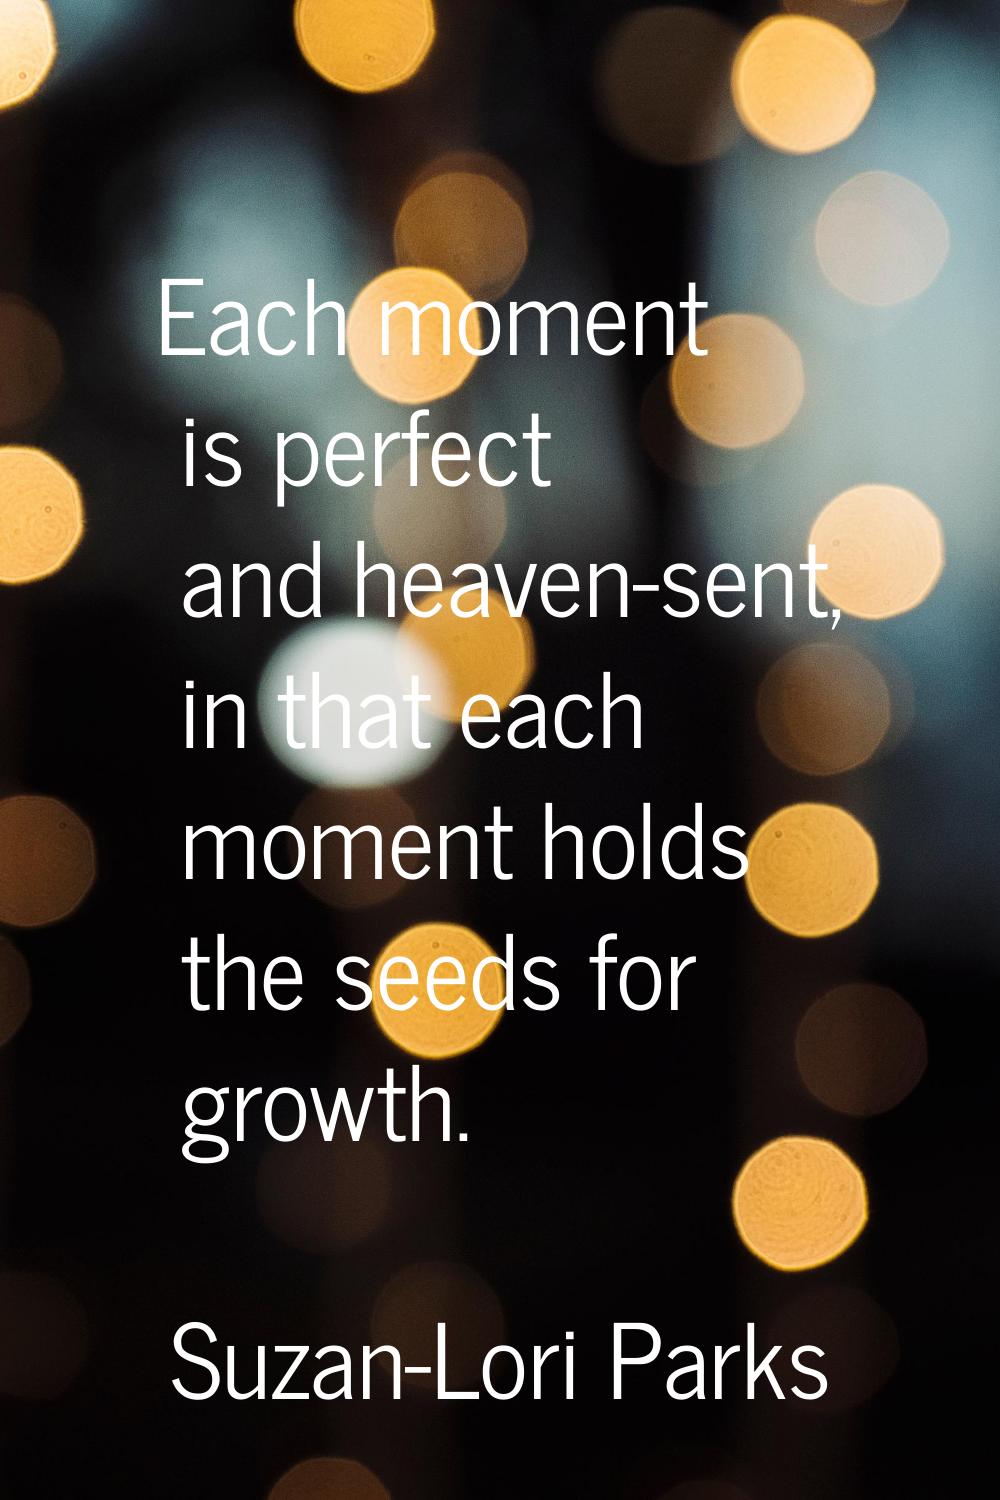 Each moment is perfect and heaven-sent, in that each moment holds the seeds for growth.